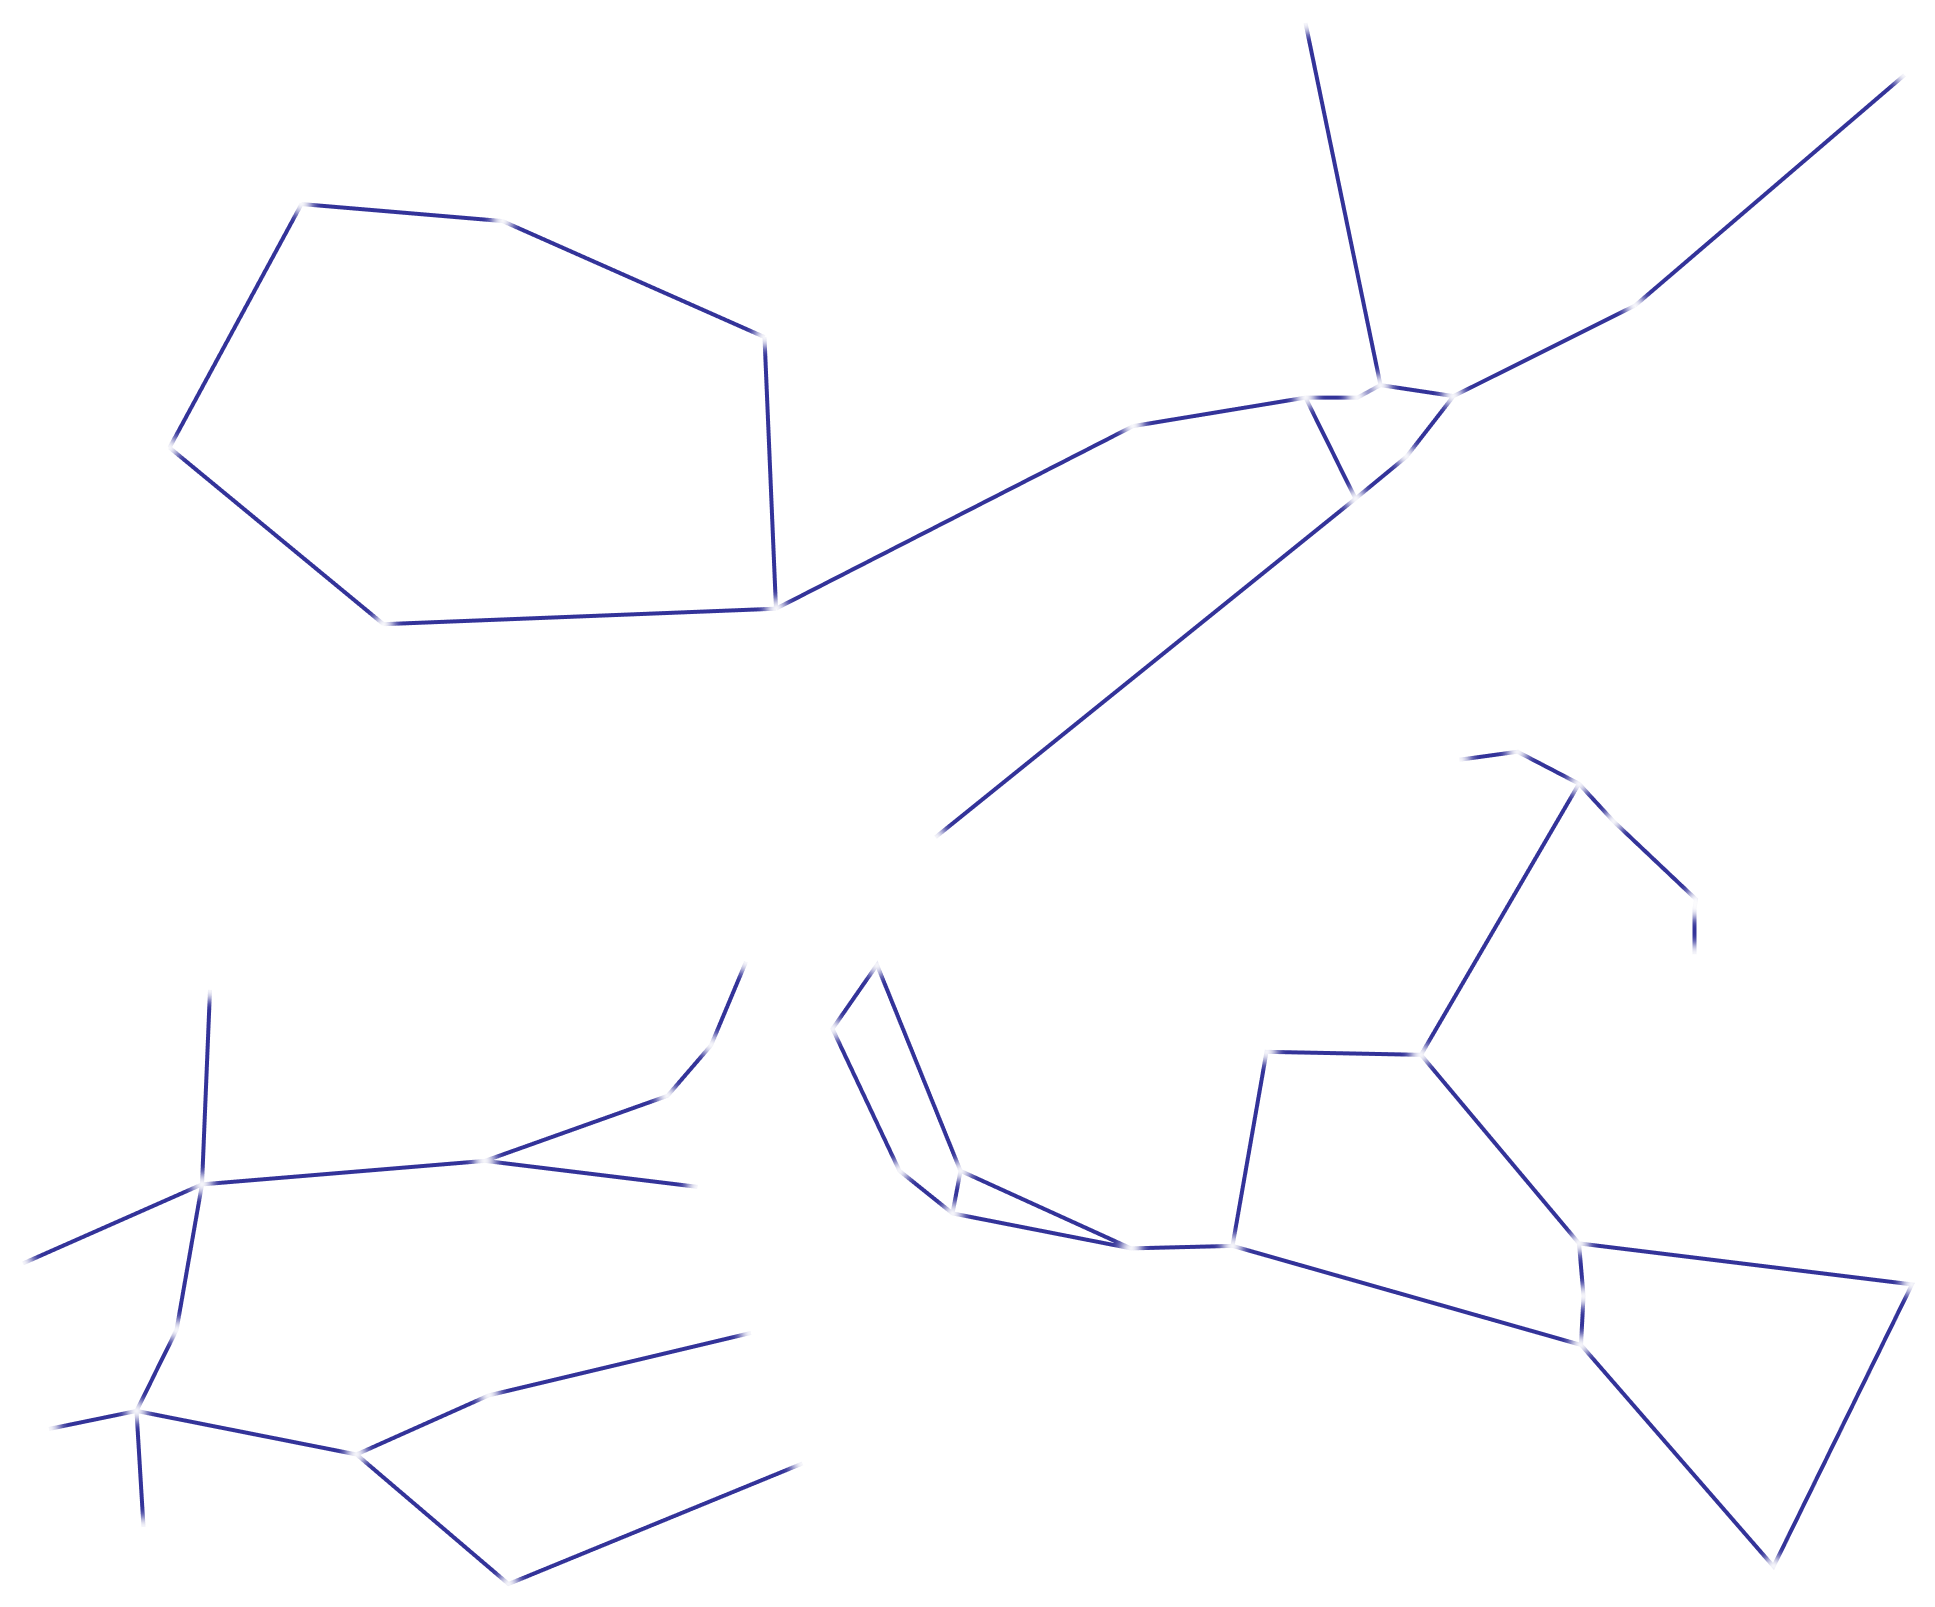 The Zodiac constellations, with the Crab Nebula at the center.